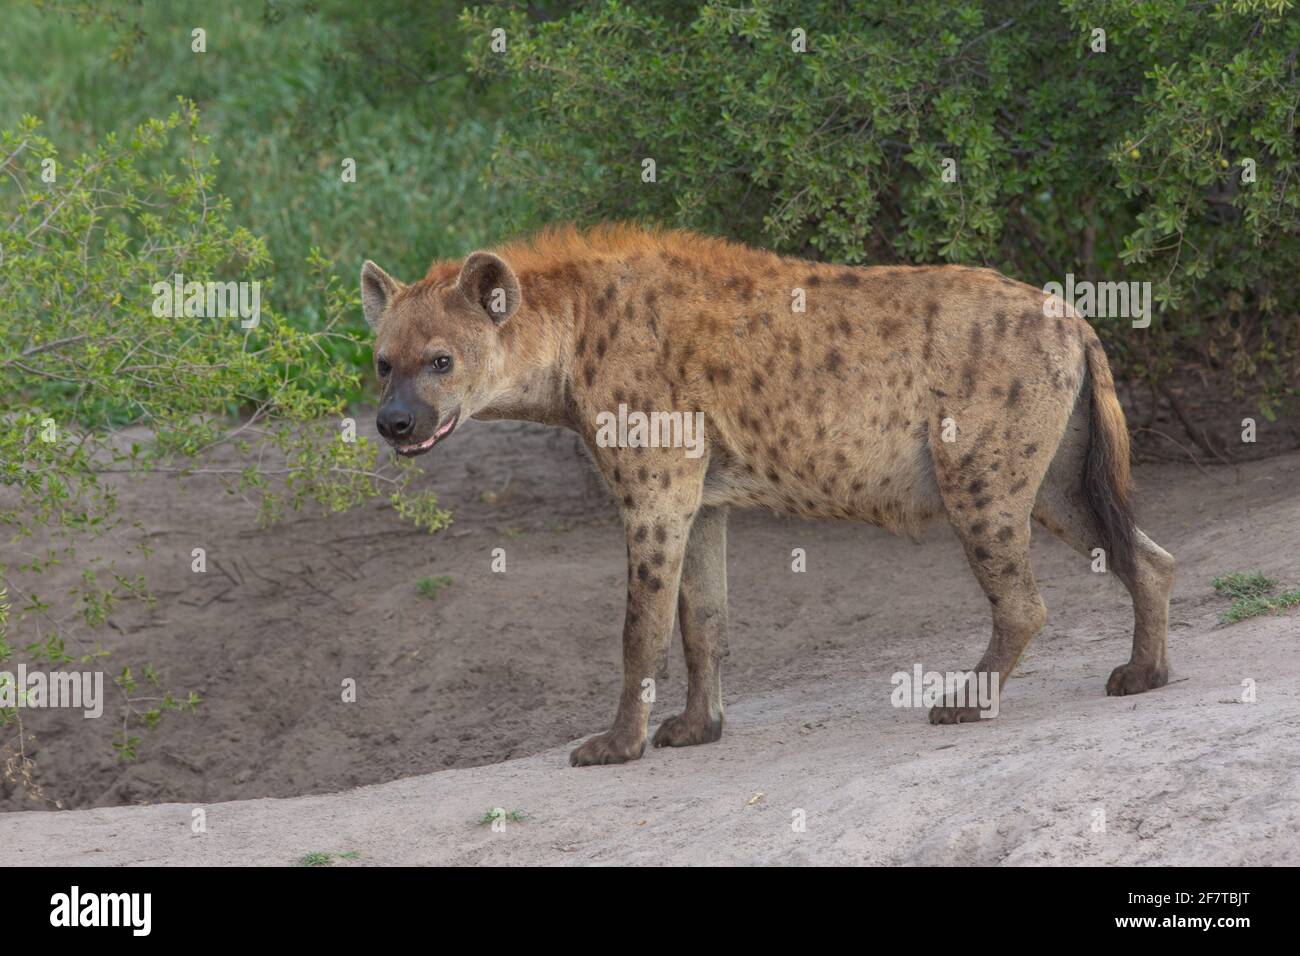 Spotted Hyaena (Crocuta crocuta). Adult. Profile. Approaching entrance to below ground den. Stock Photo